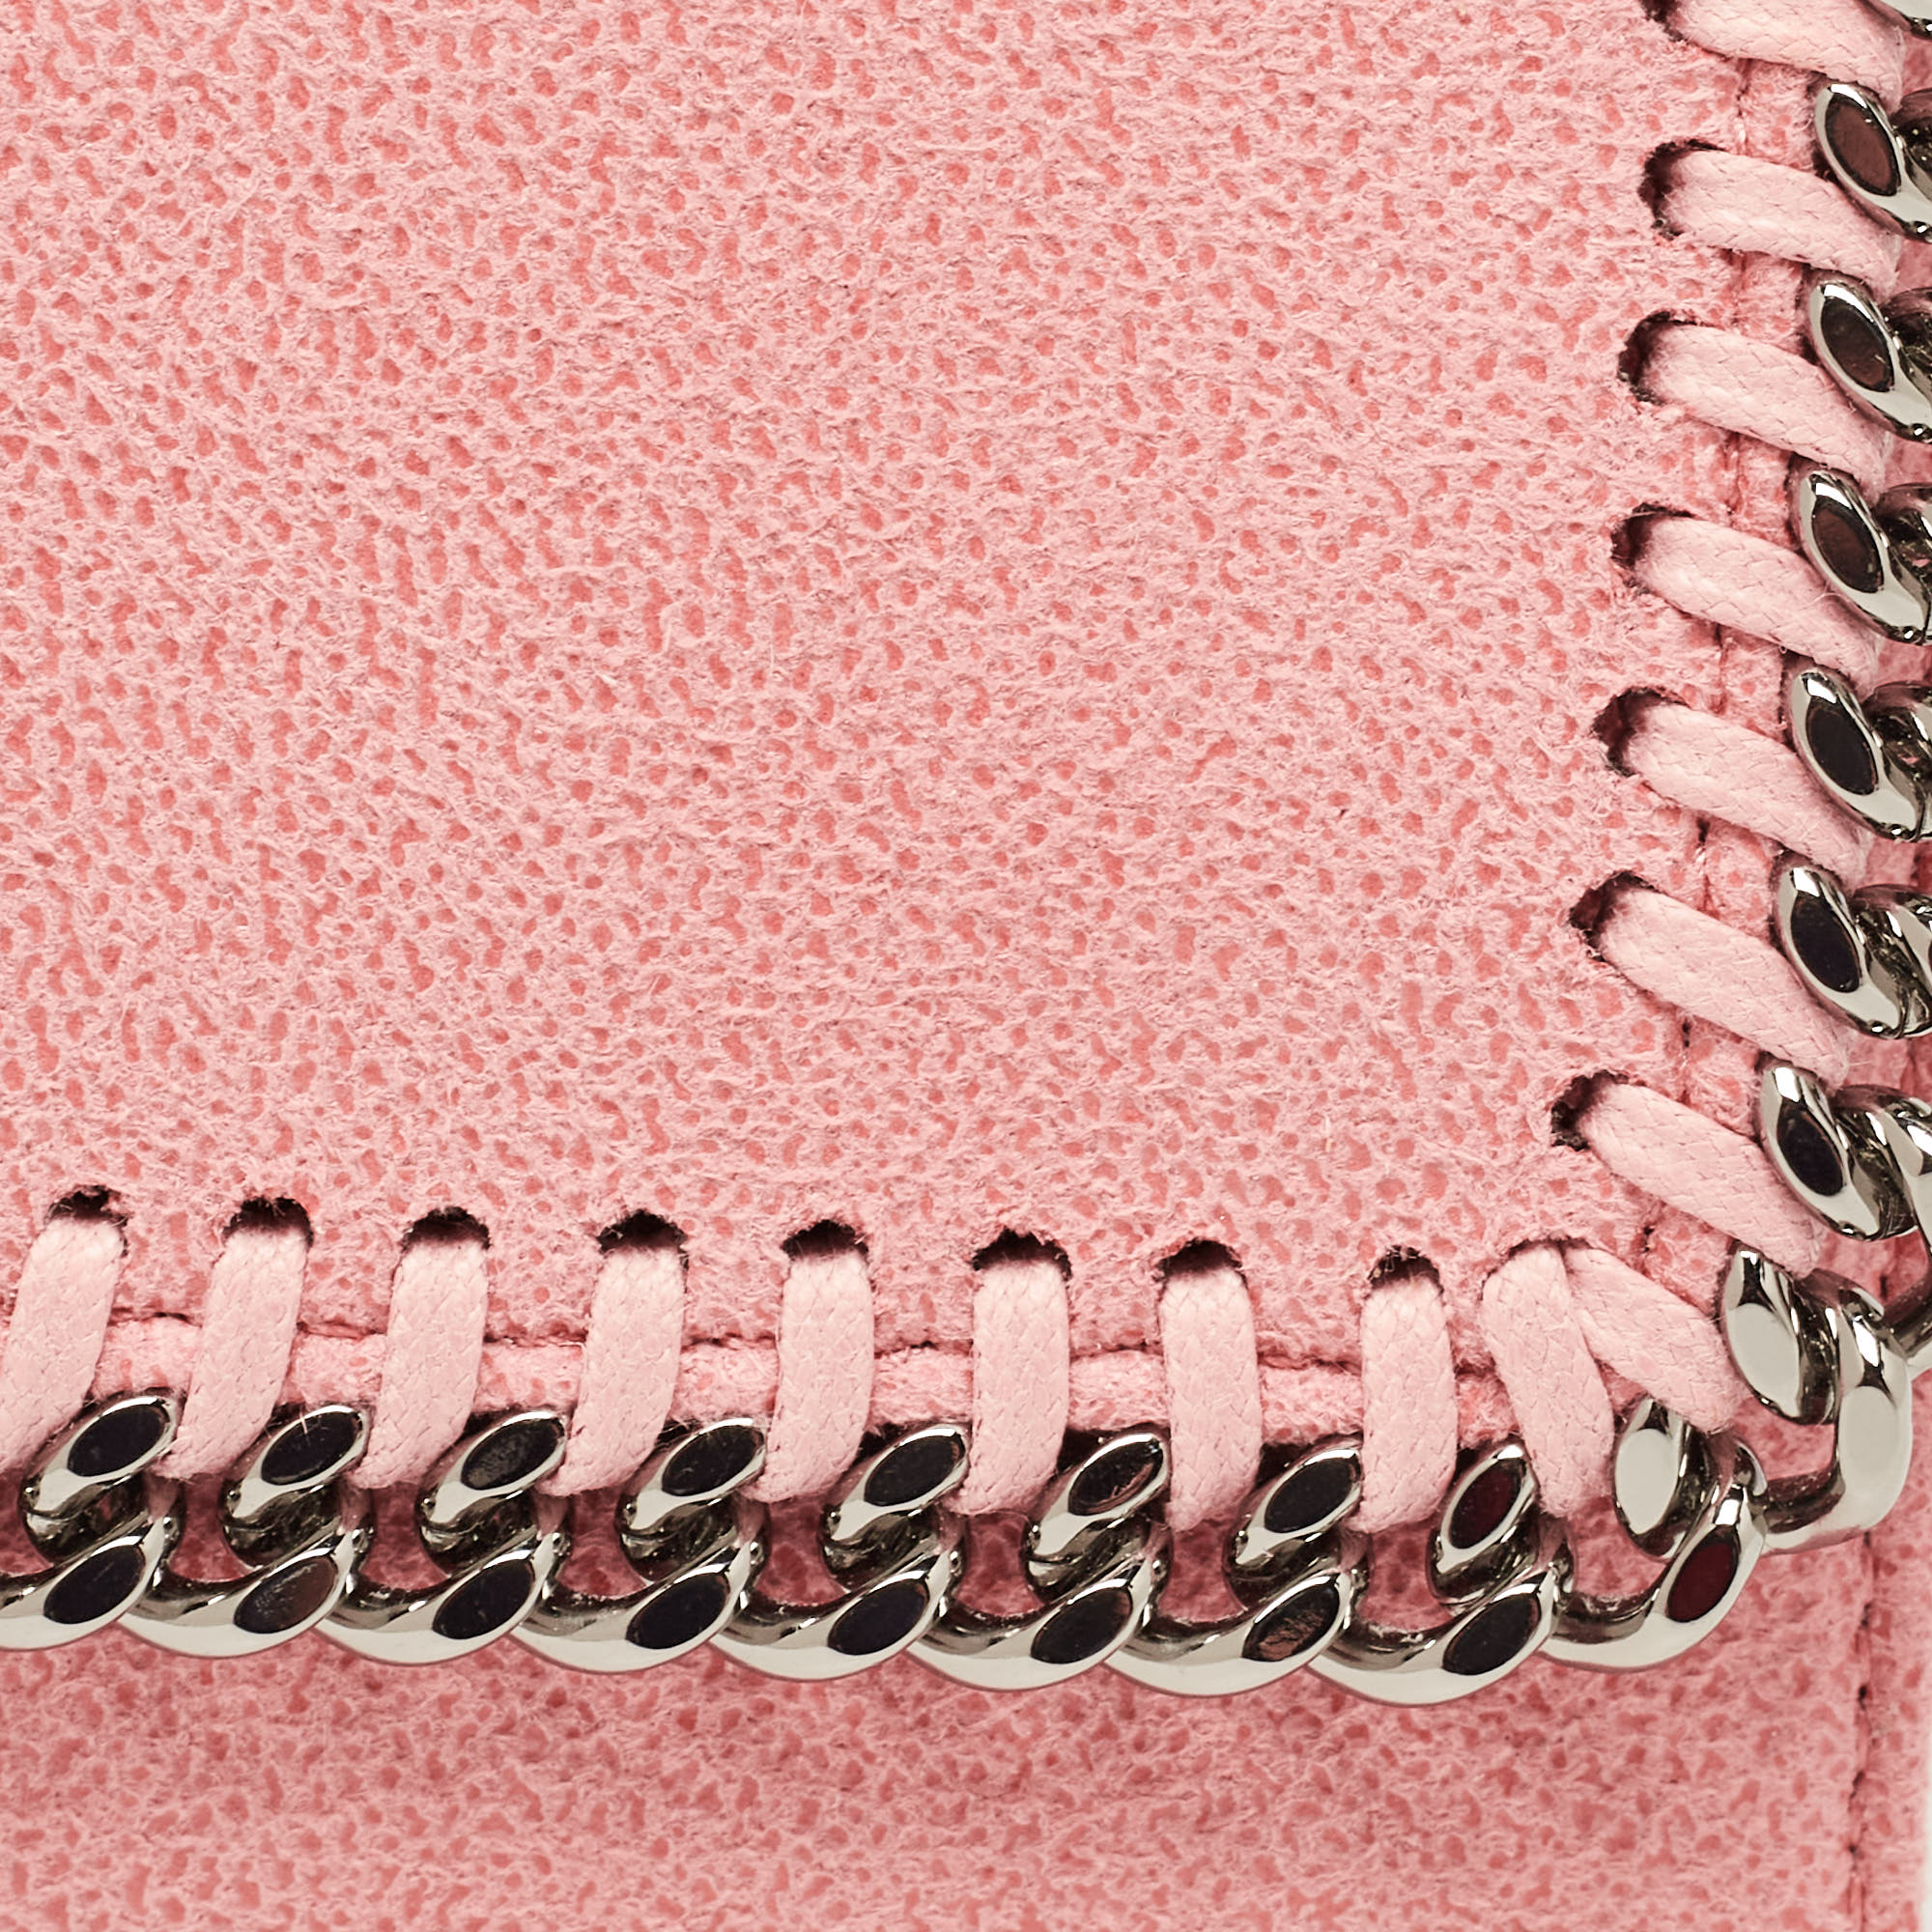 Stella McCartney Pink Faux Leather Falabella Compact Wallet